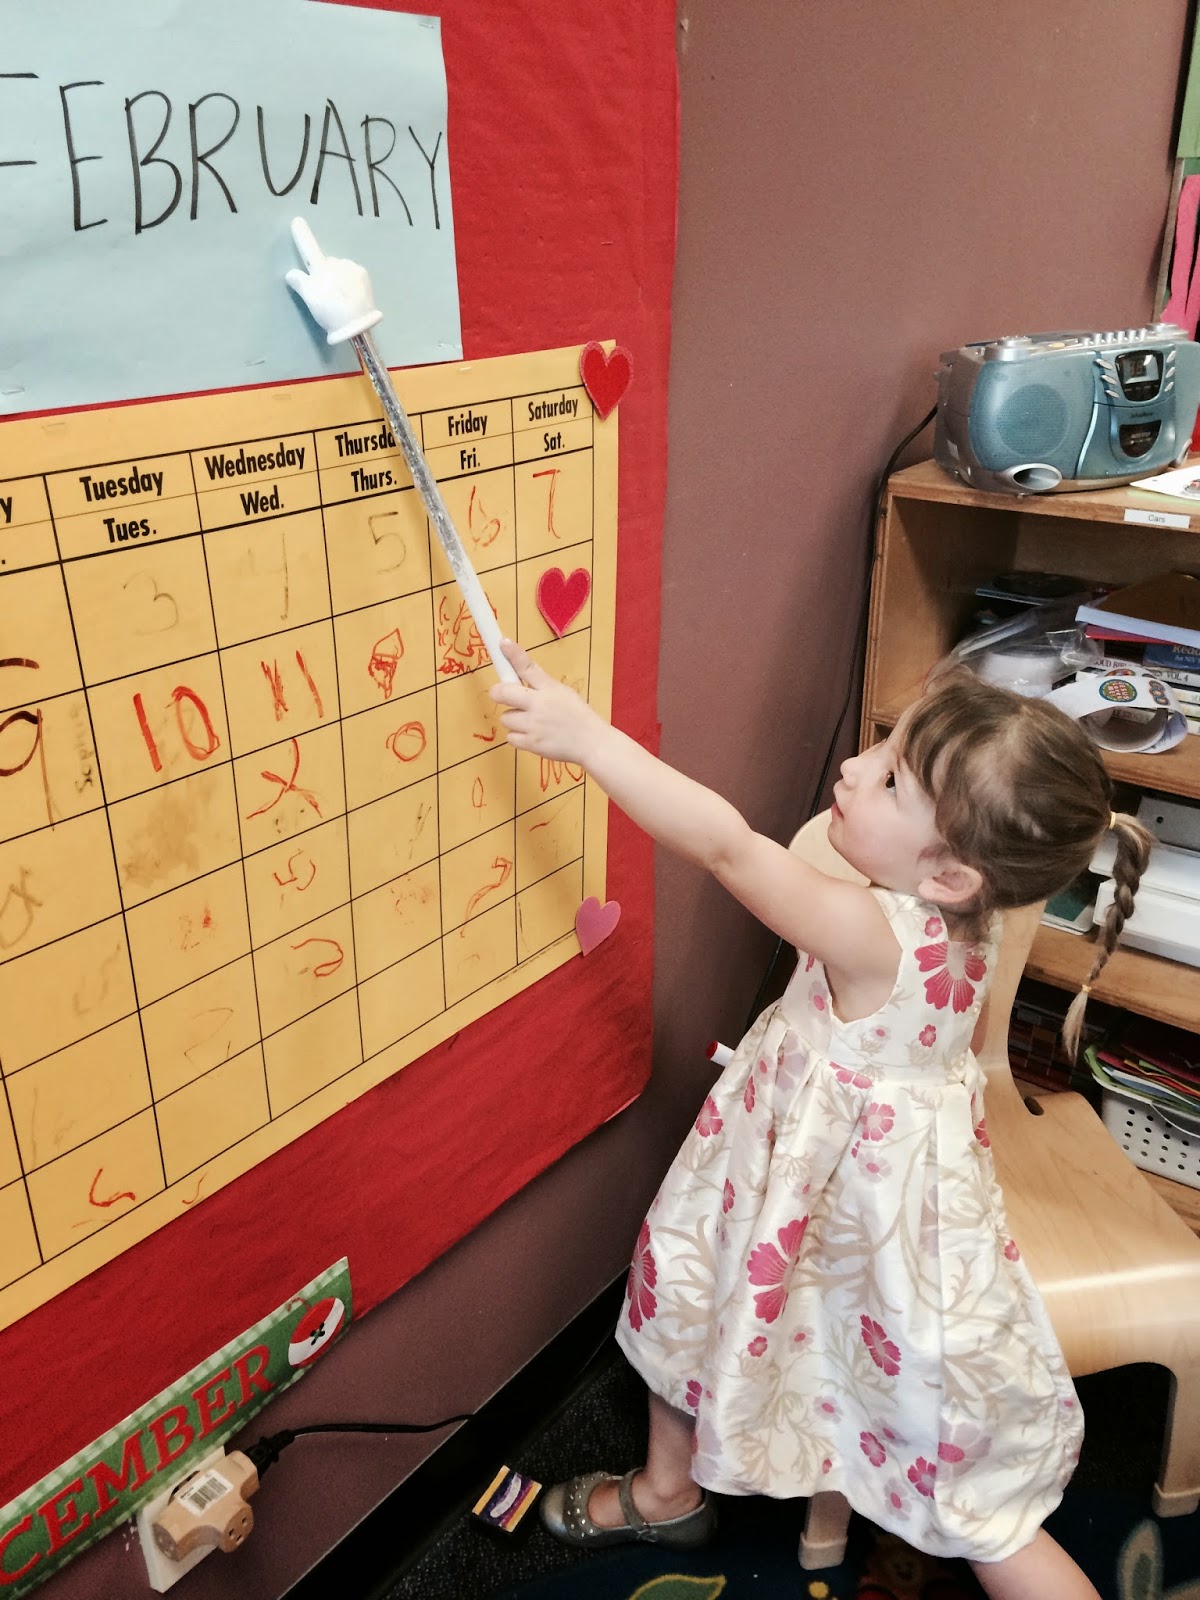 Miss E, in a floral dress, using a hand pointer (with a pointing, white hand on the end) to point to the word "February" on the preschool calendar